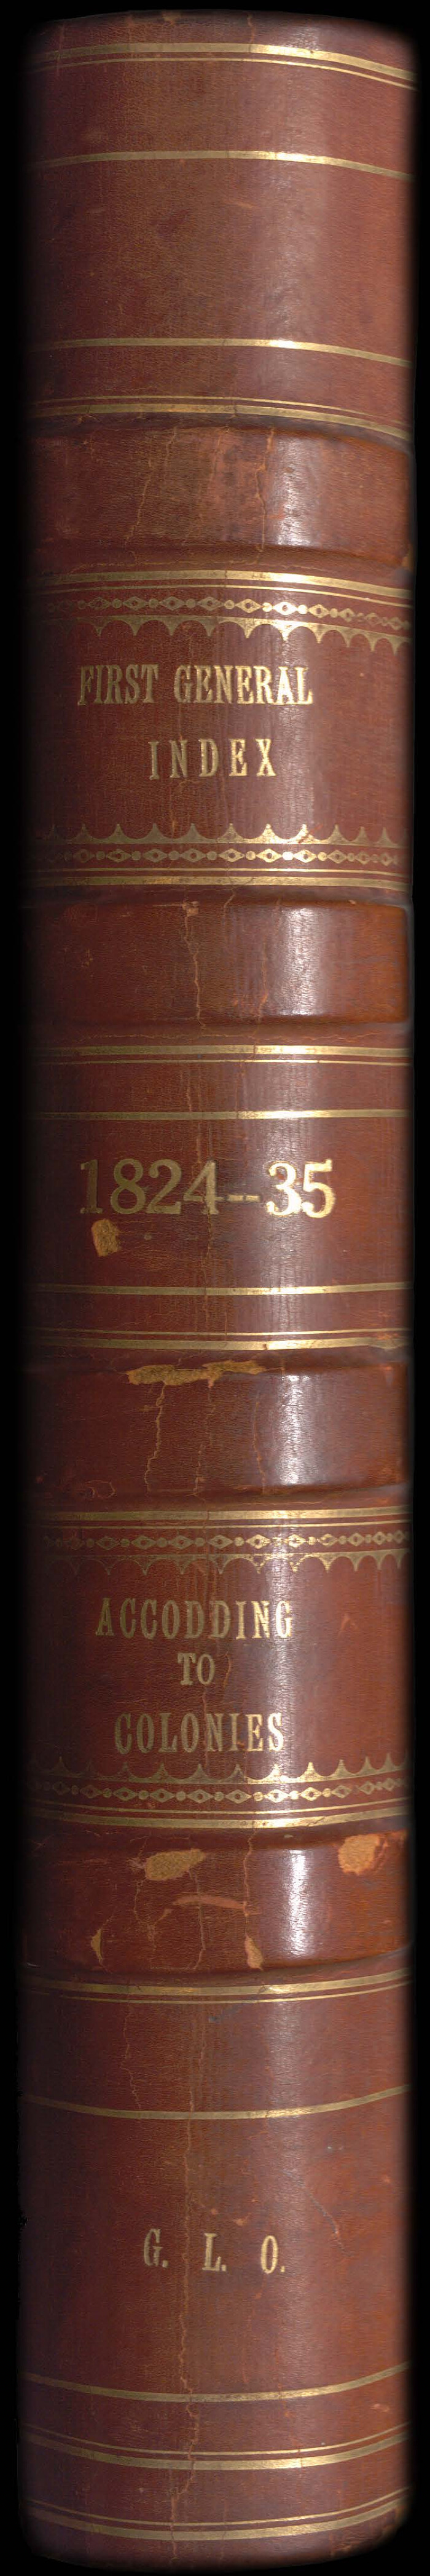 94533, First General Index, 1824-35, Historical Volumes